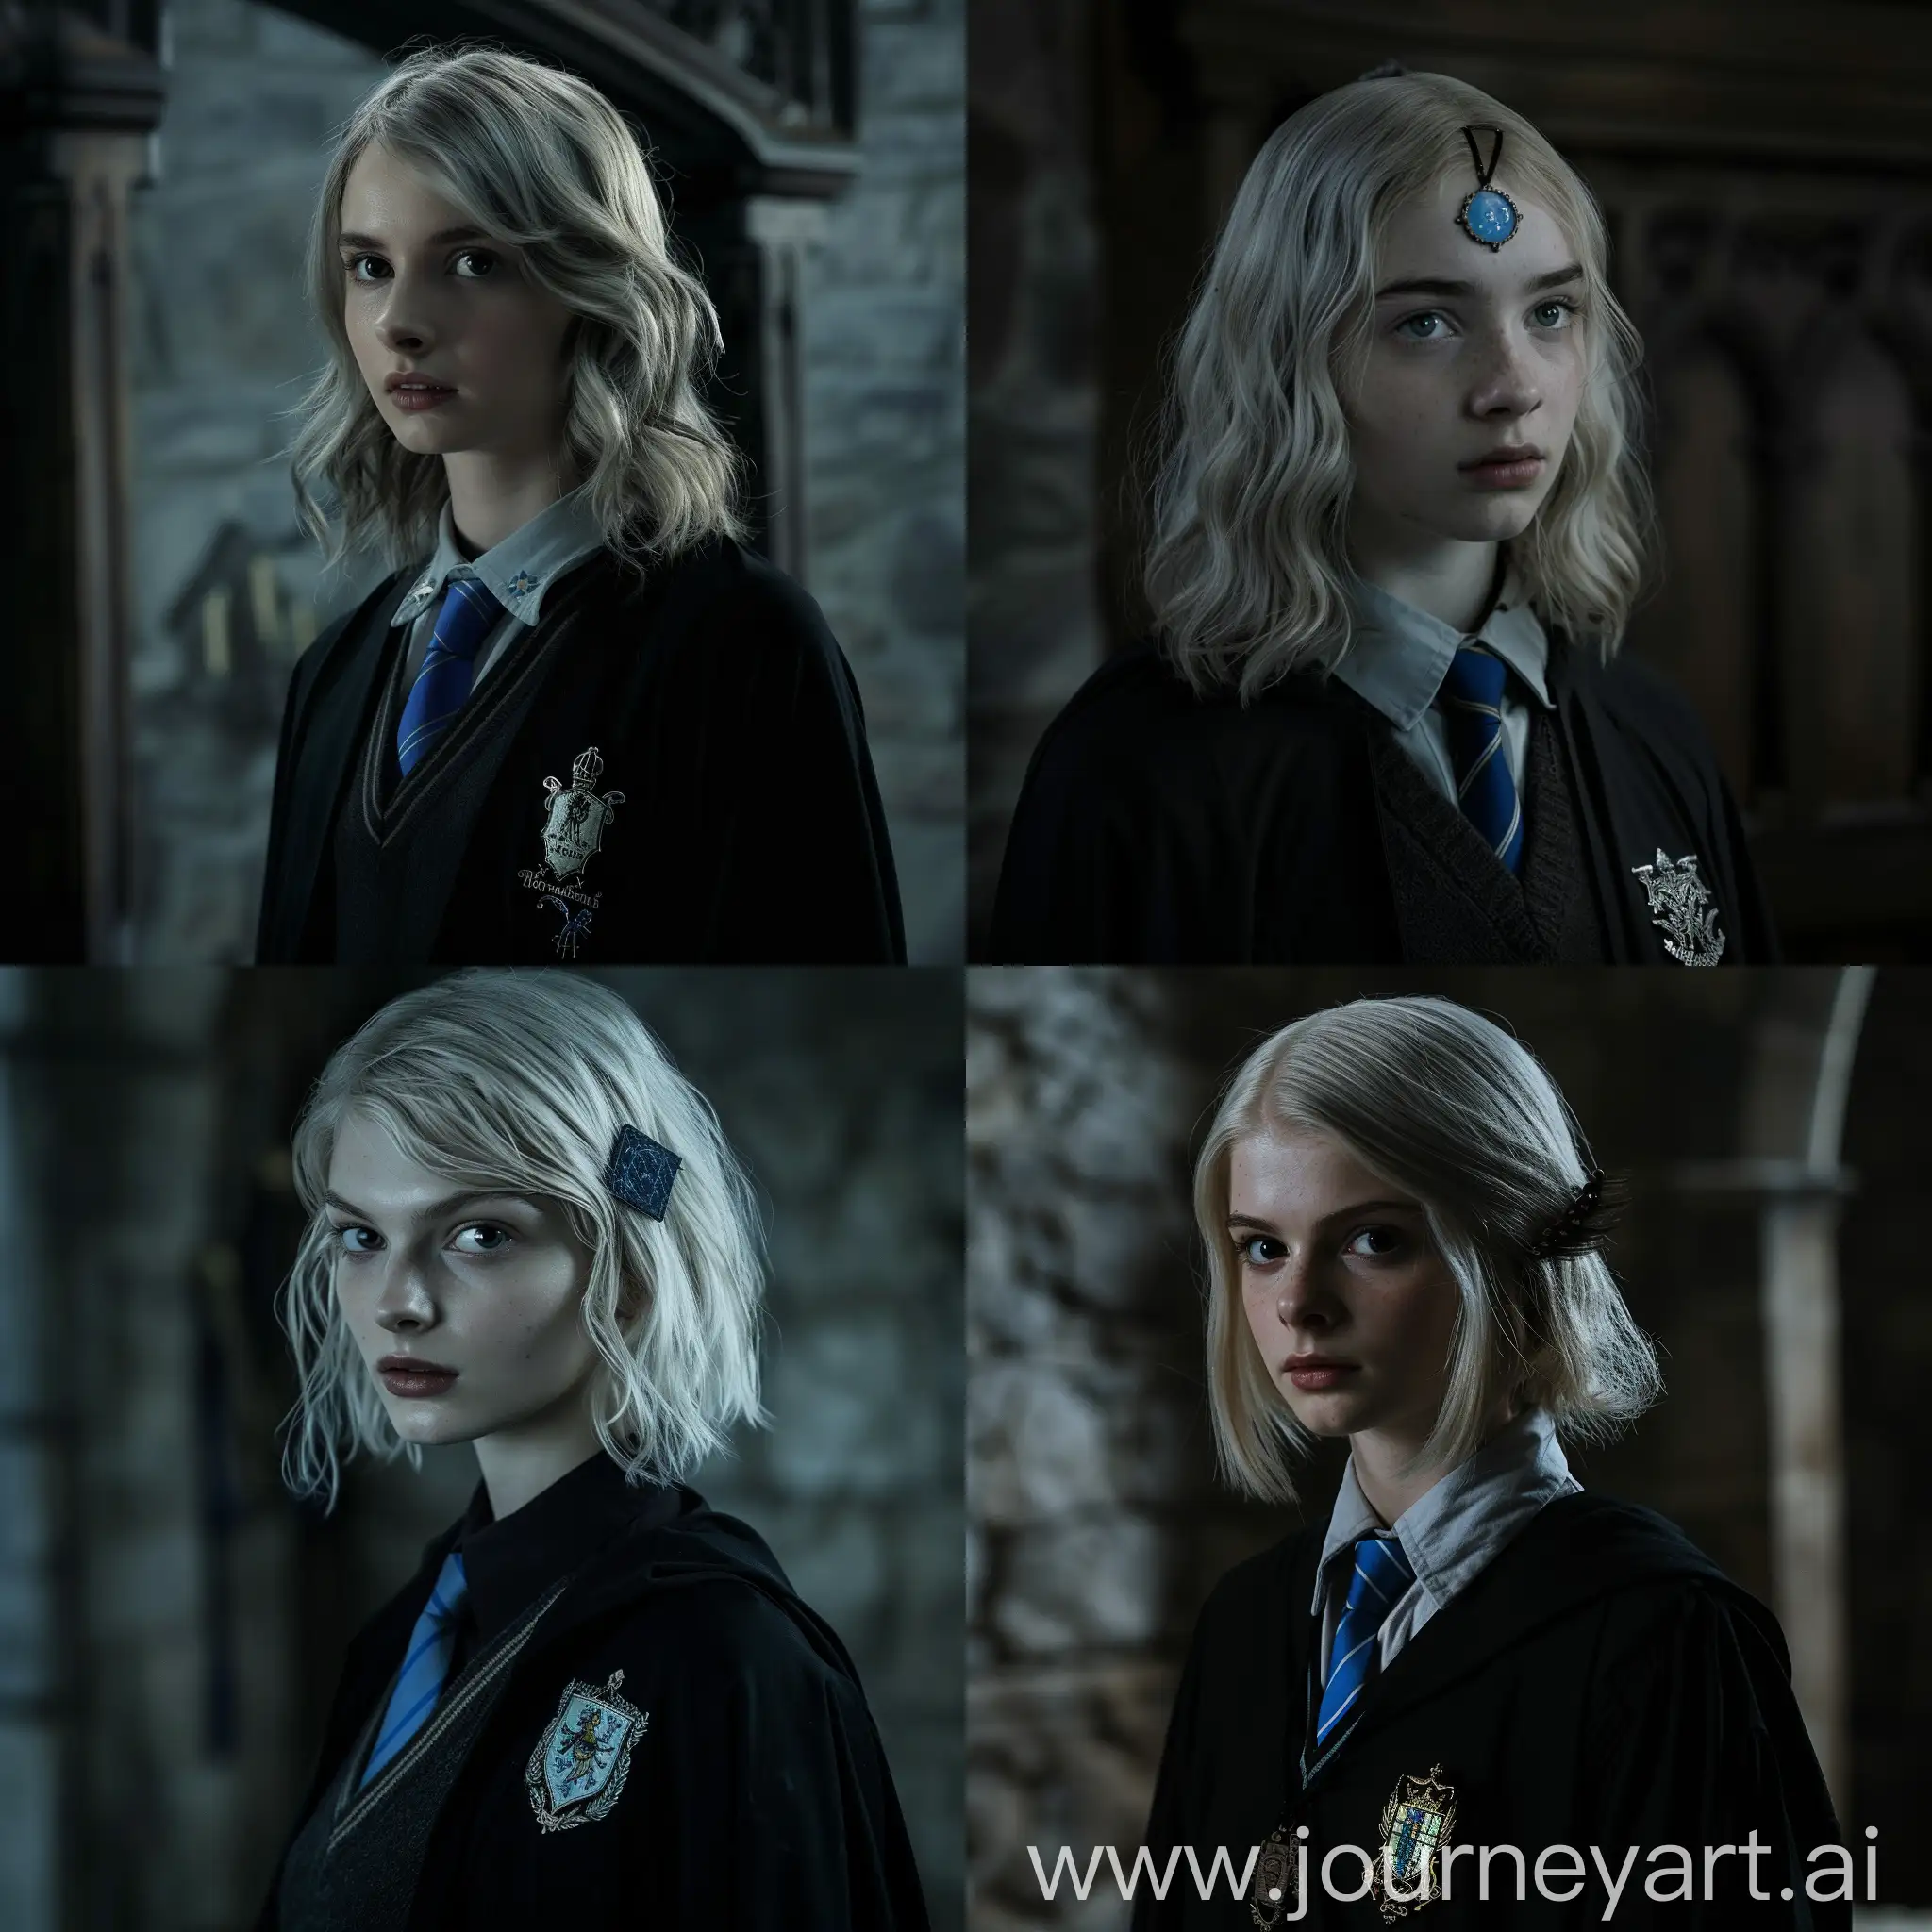 Cunning-Ravenclaw-Girl-in-Hogwarts-Uniform-with-Apathetic-Gaze